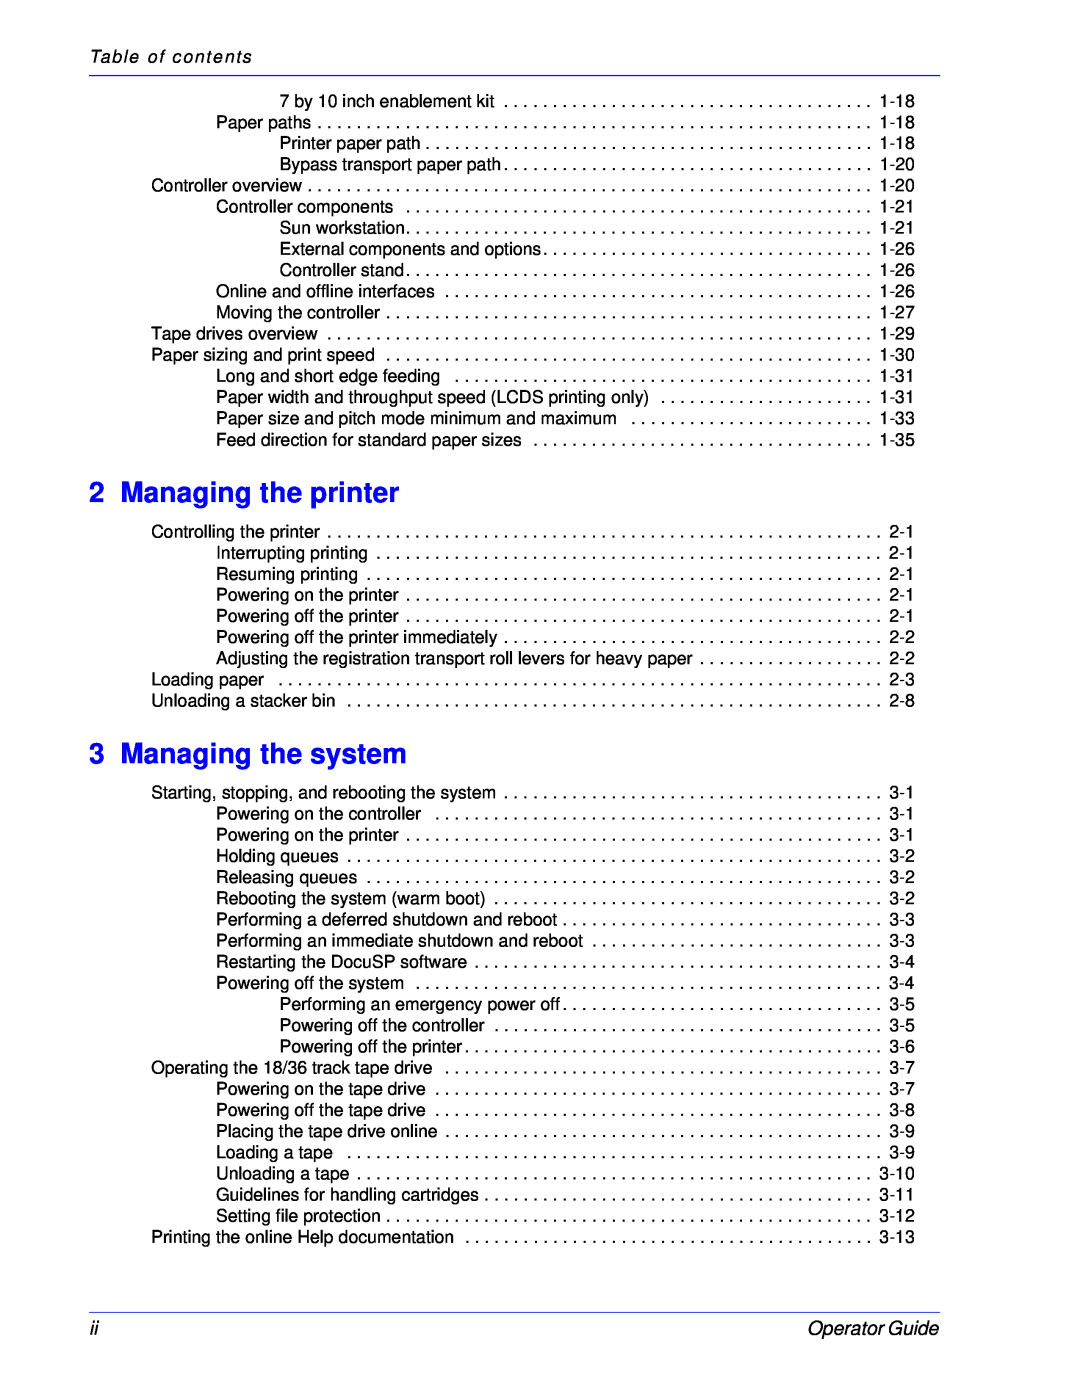 Xerox 100, 180 EPS manual Managing the printer, Managing the system, Operator Guide, Table of contents 